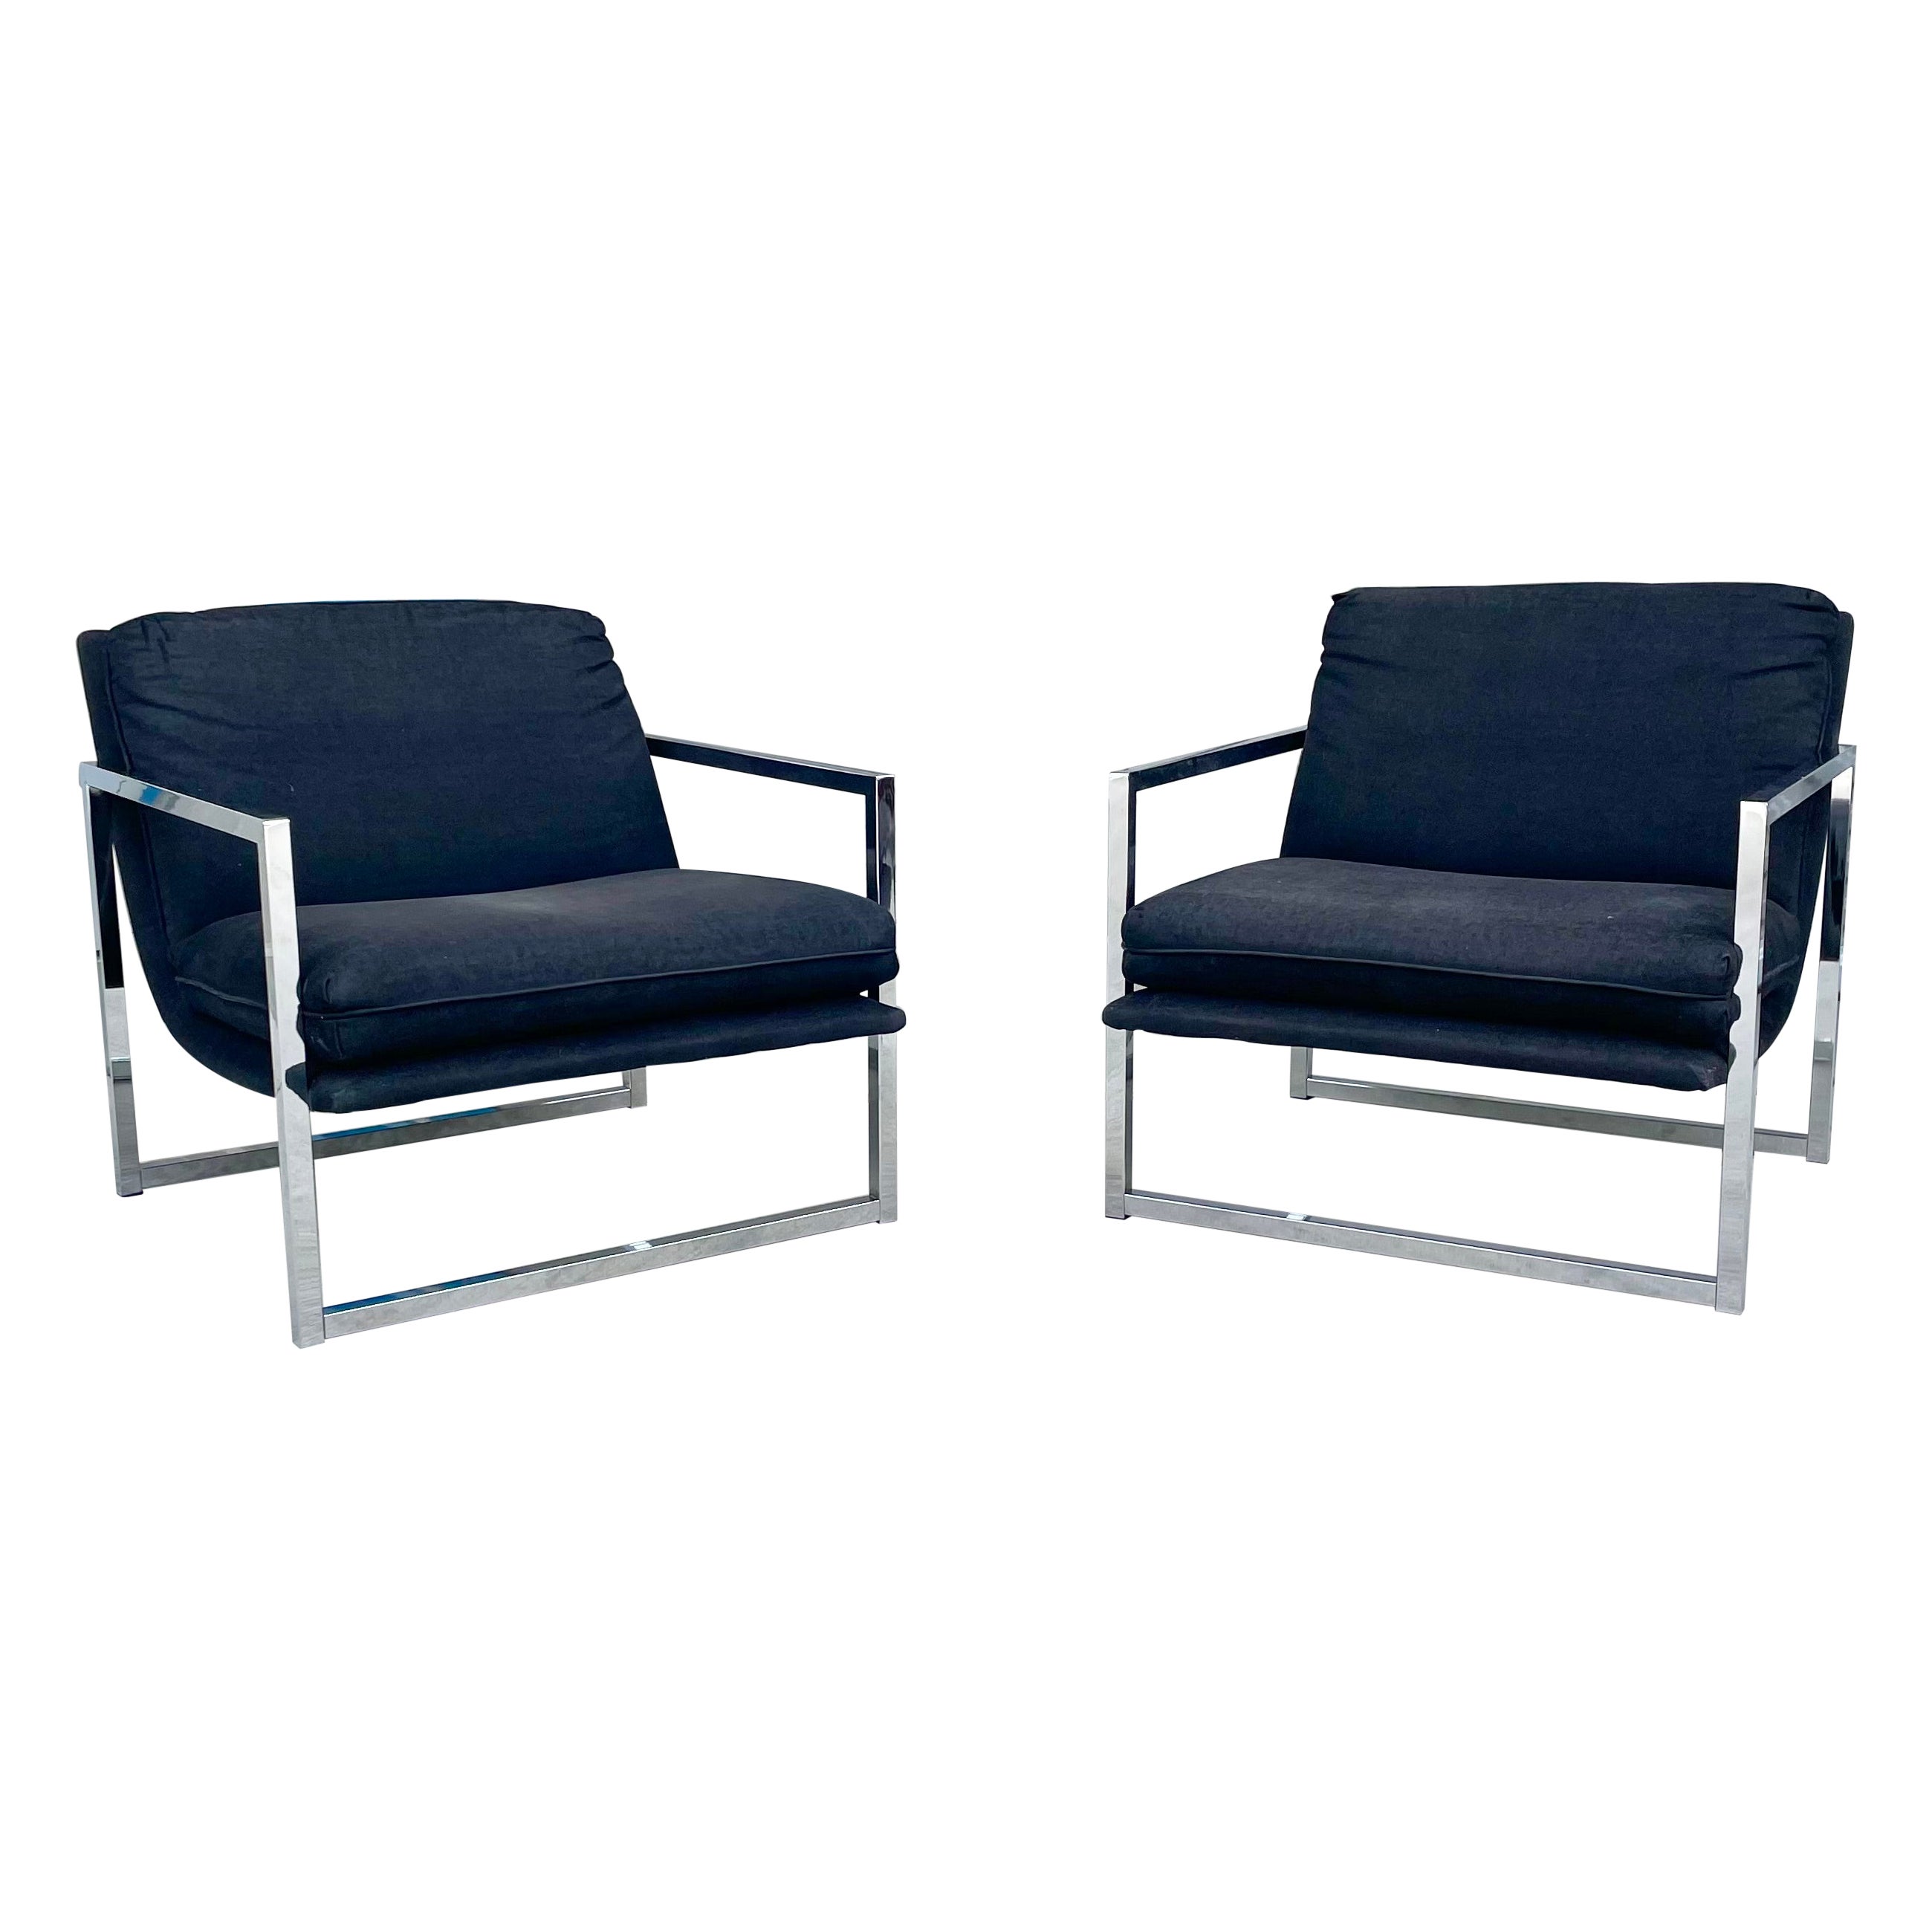 1970s Vintage Chrome "Scoop" Lounge Chairs Styled After Milo Baughman - a Pair For Sale